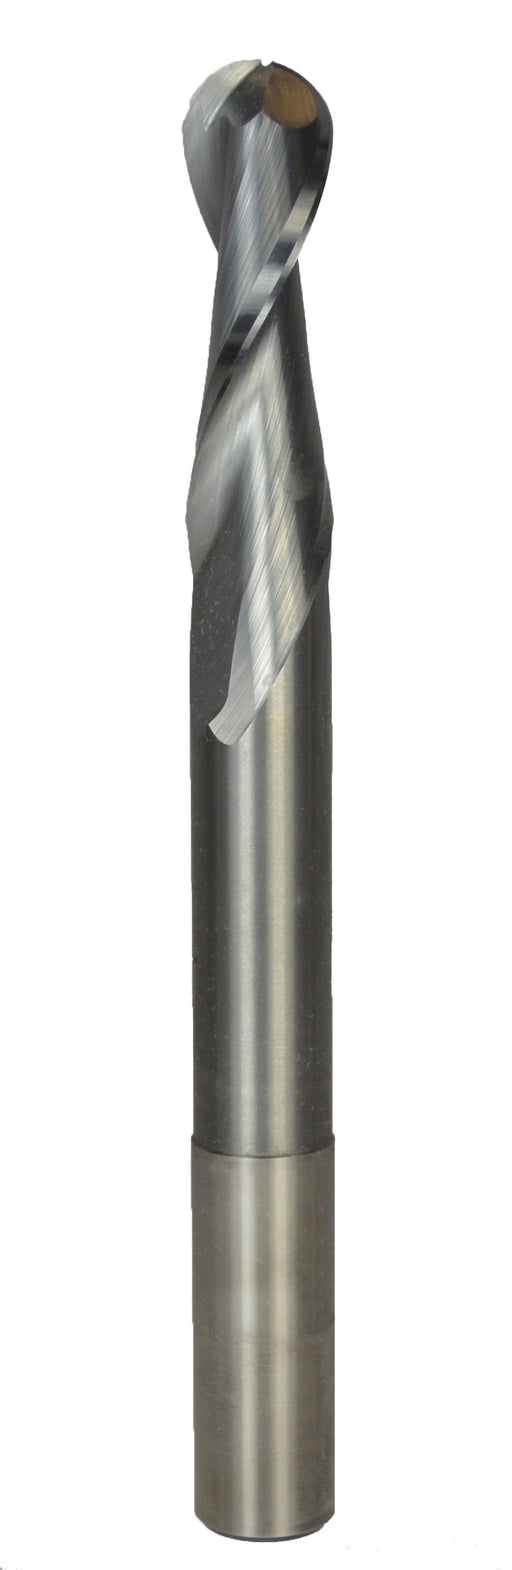 Solid Tungsten Spiral Upcut Ballnose Cutter - 2 Flute - Imperial Range - Long Series - tungstenandtool